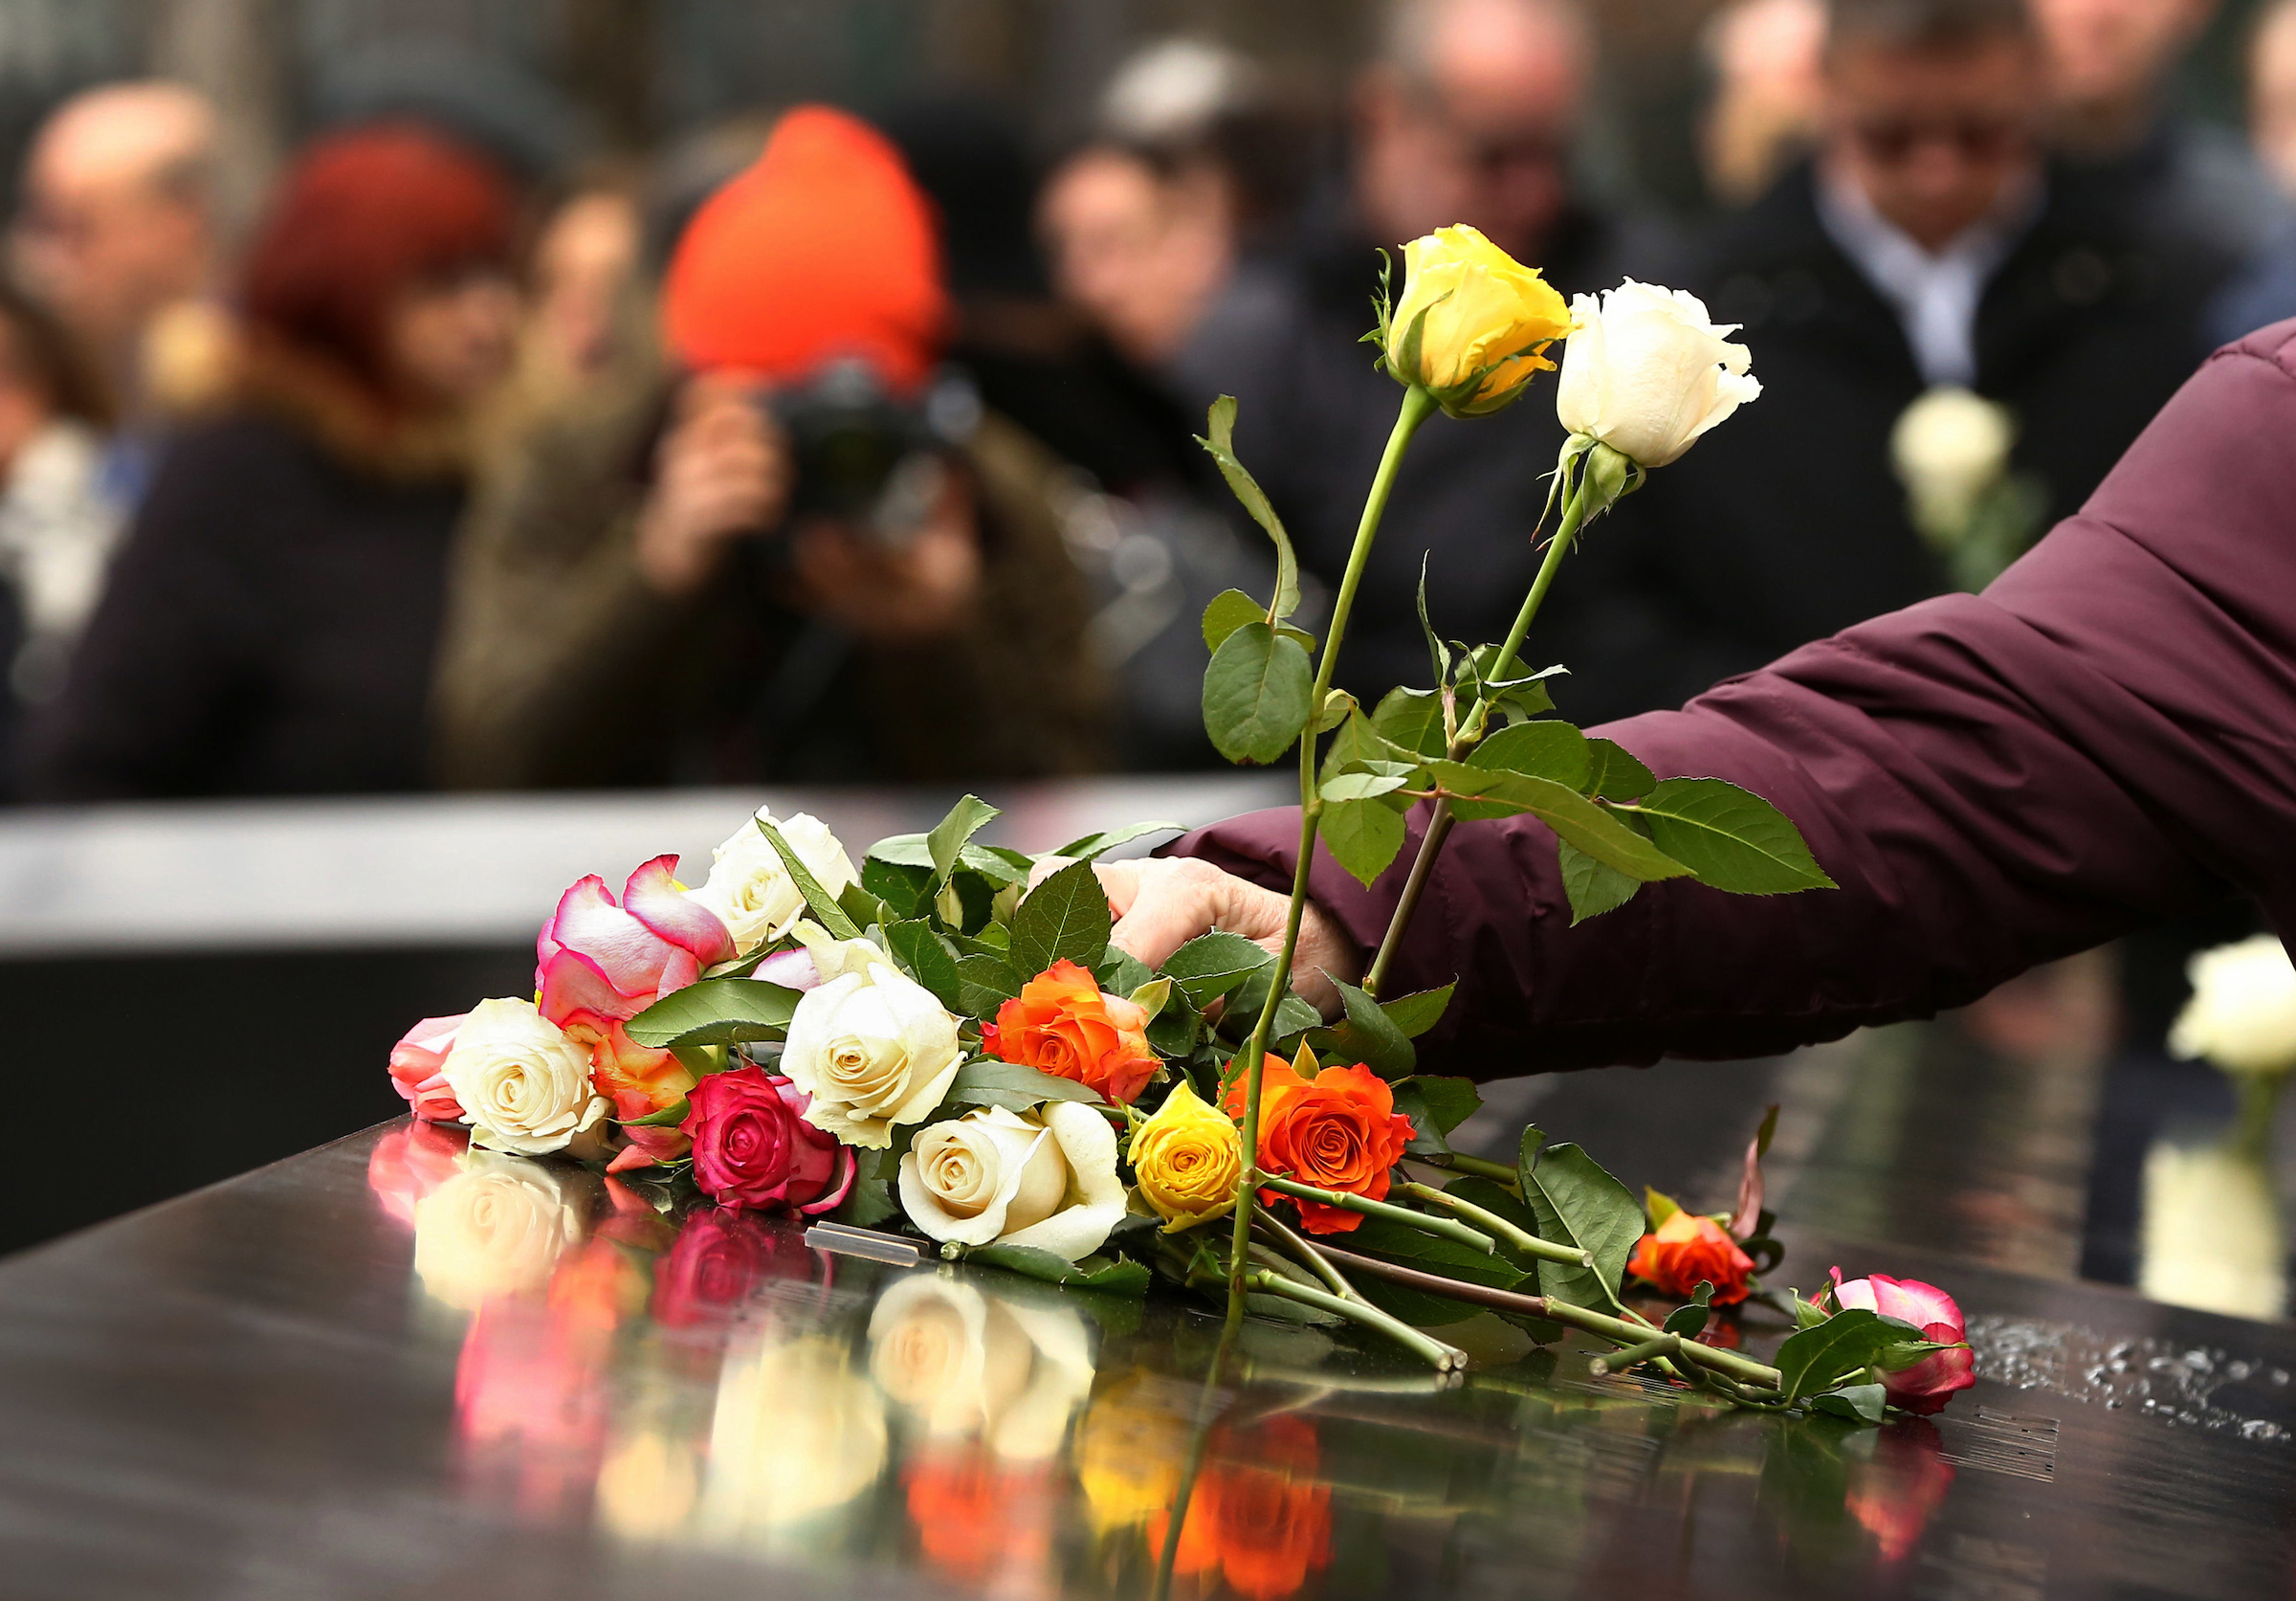 A person’s arm is seen placing a bouquet of red, orange, yellow, and whiite roses on a bronze parapet at the Memorial.